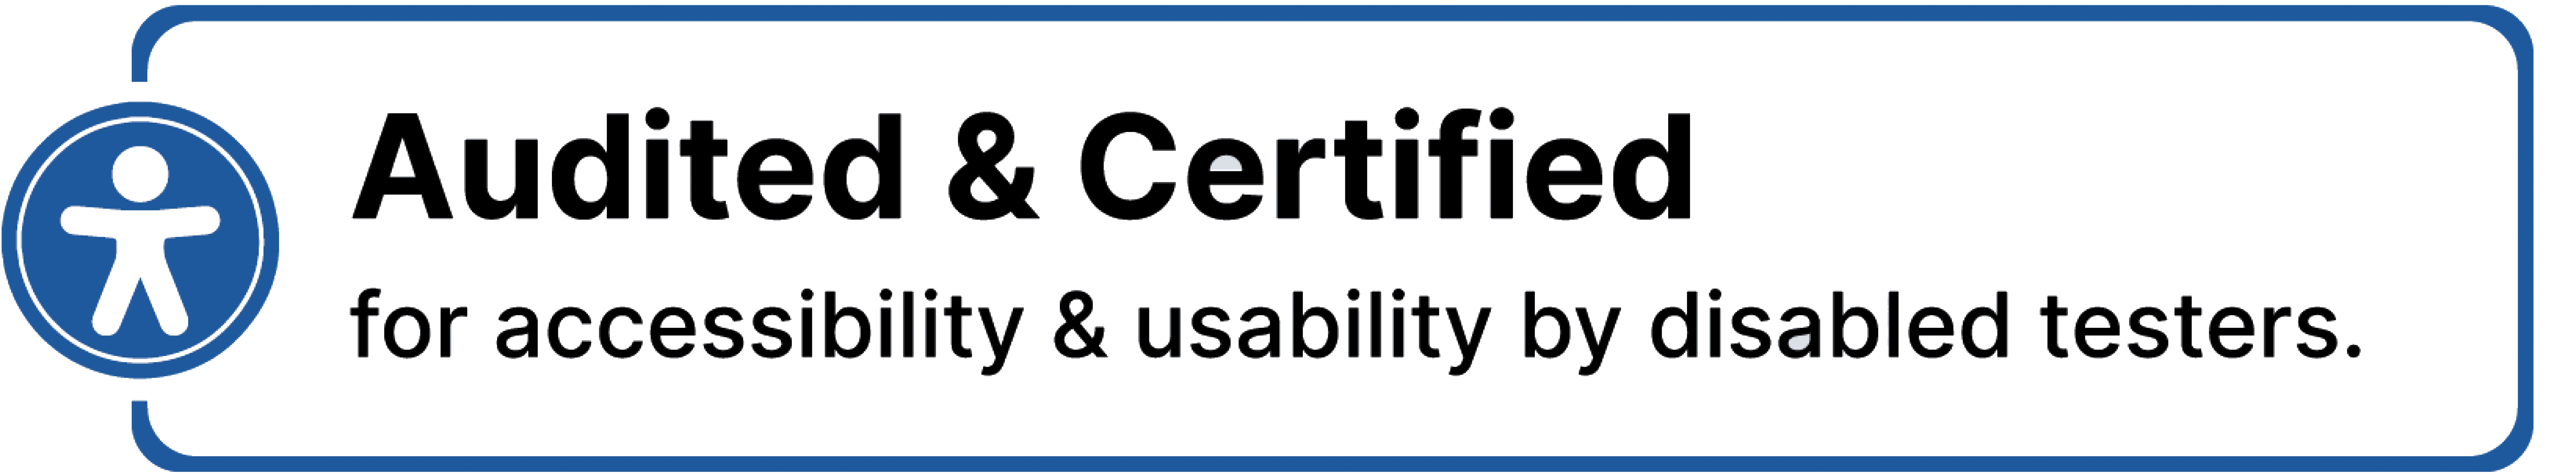 Audited and Certified for accessibility and usability by disabled testers.”